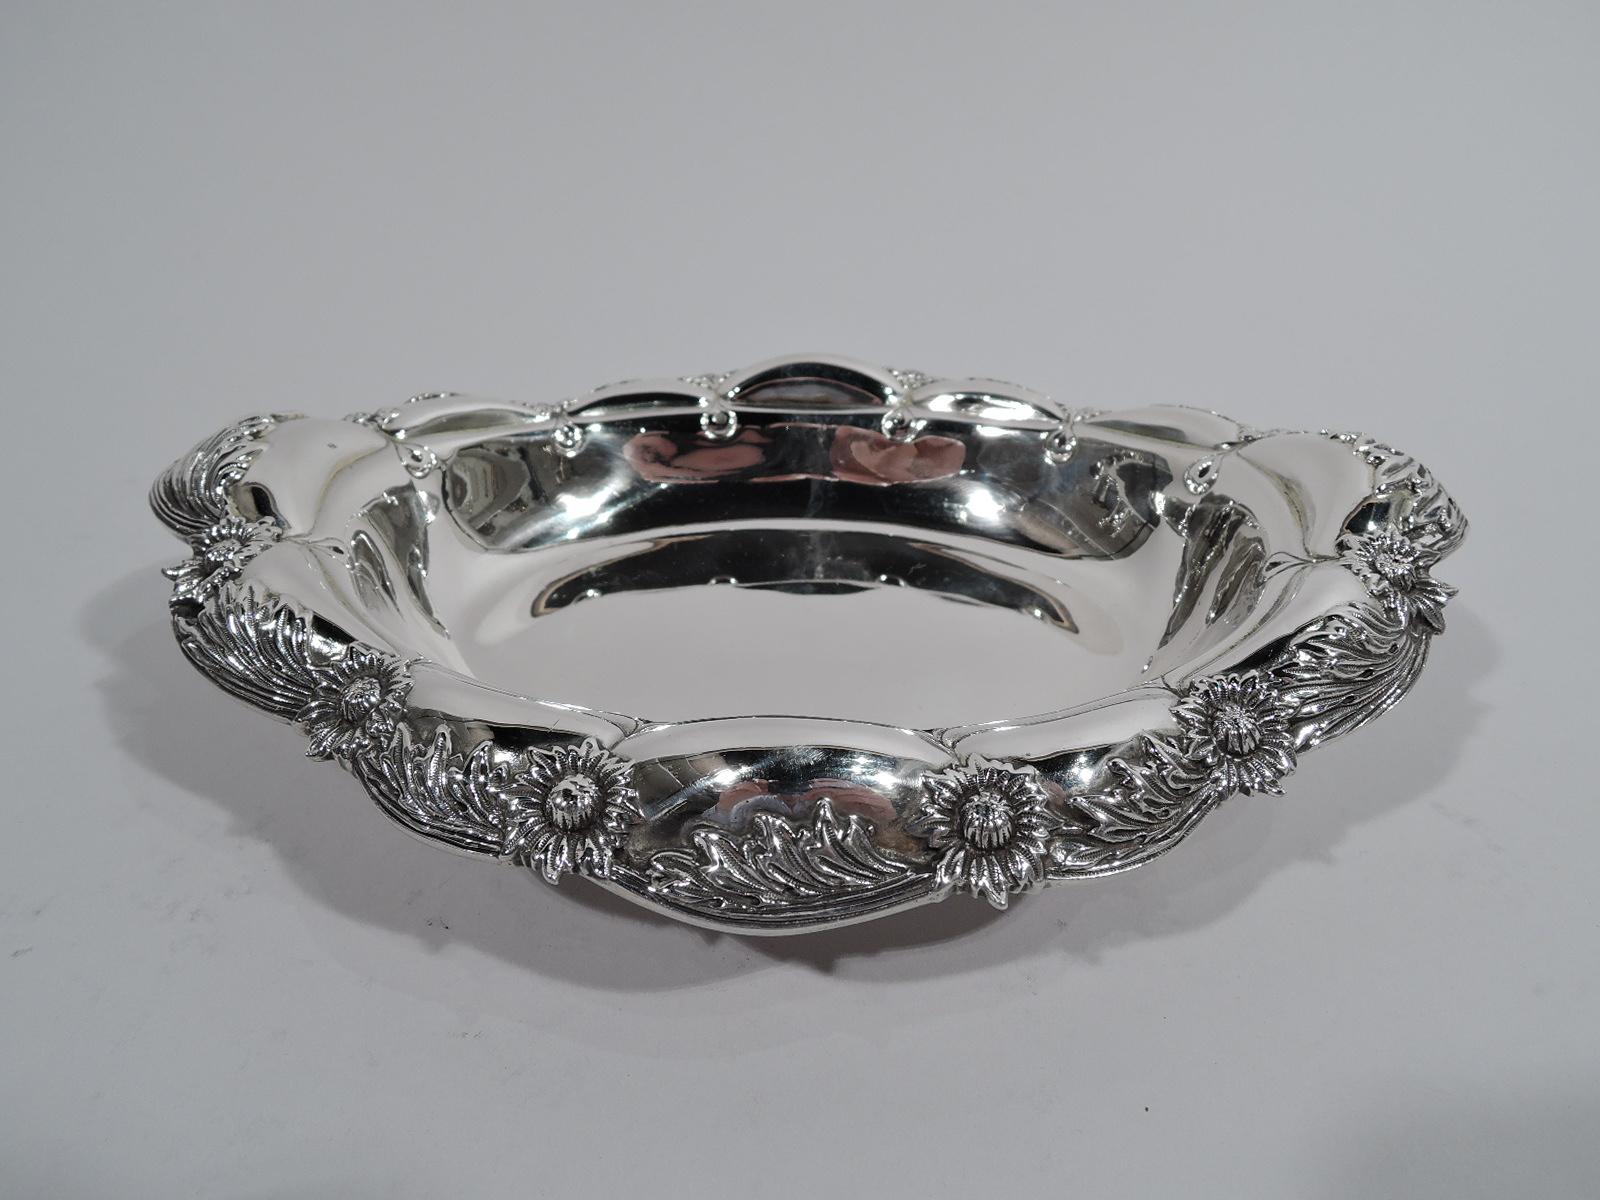 Pair of chrysanthemum sterling silver serving bowls. Made by Tiffany & Co. in New York. Each: Oval well and turned-down petal rim in alternating leaf and flower head pattern. Short foot with applied scrolls. Restrained and elegant pieces in the